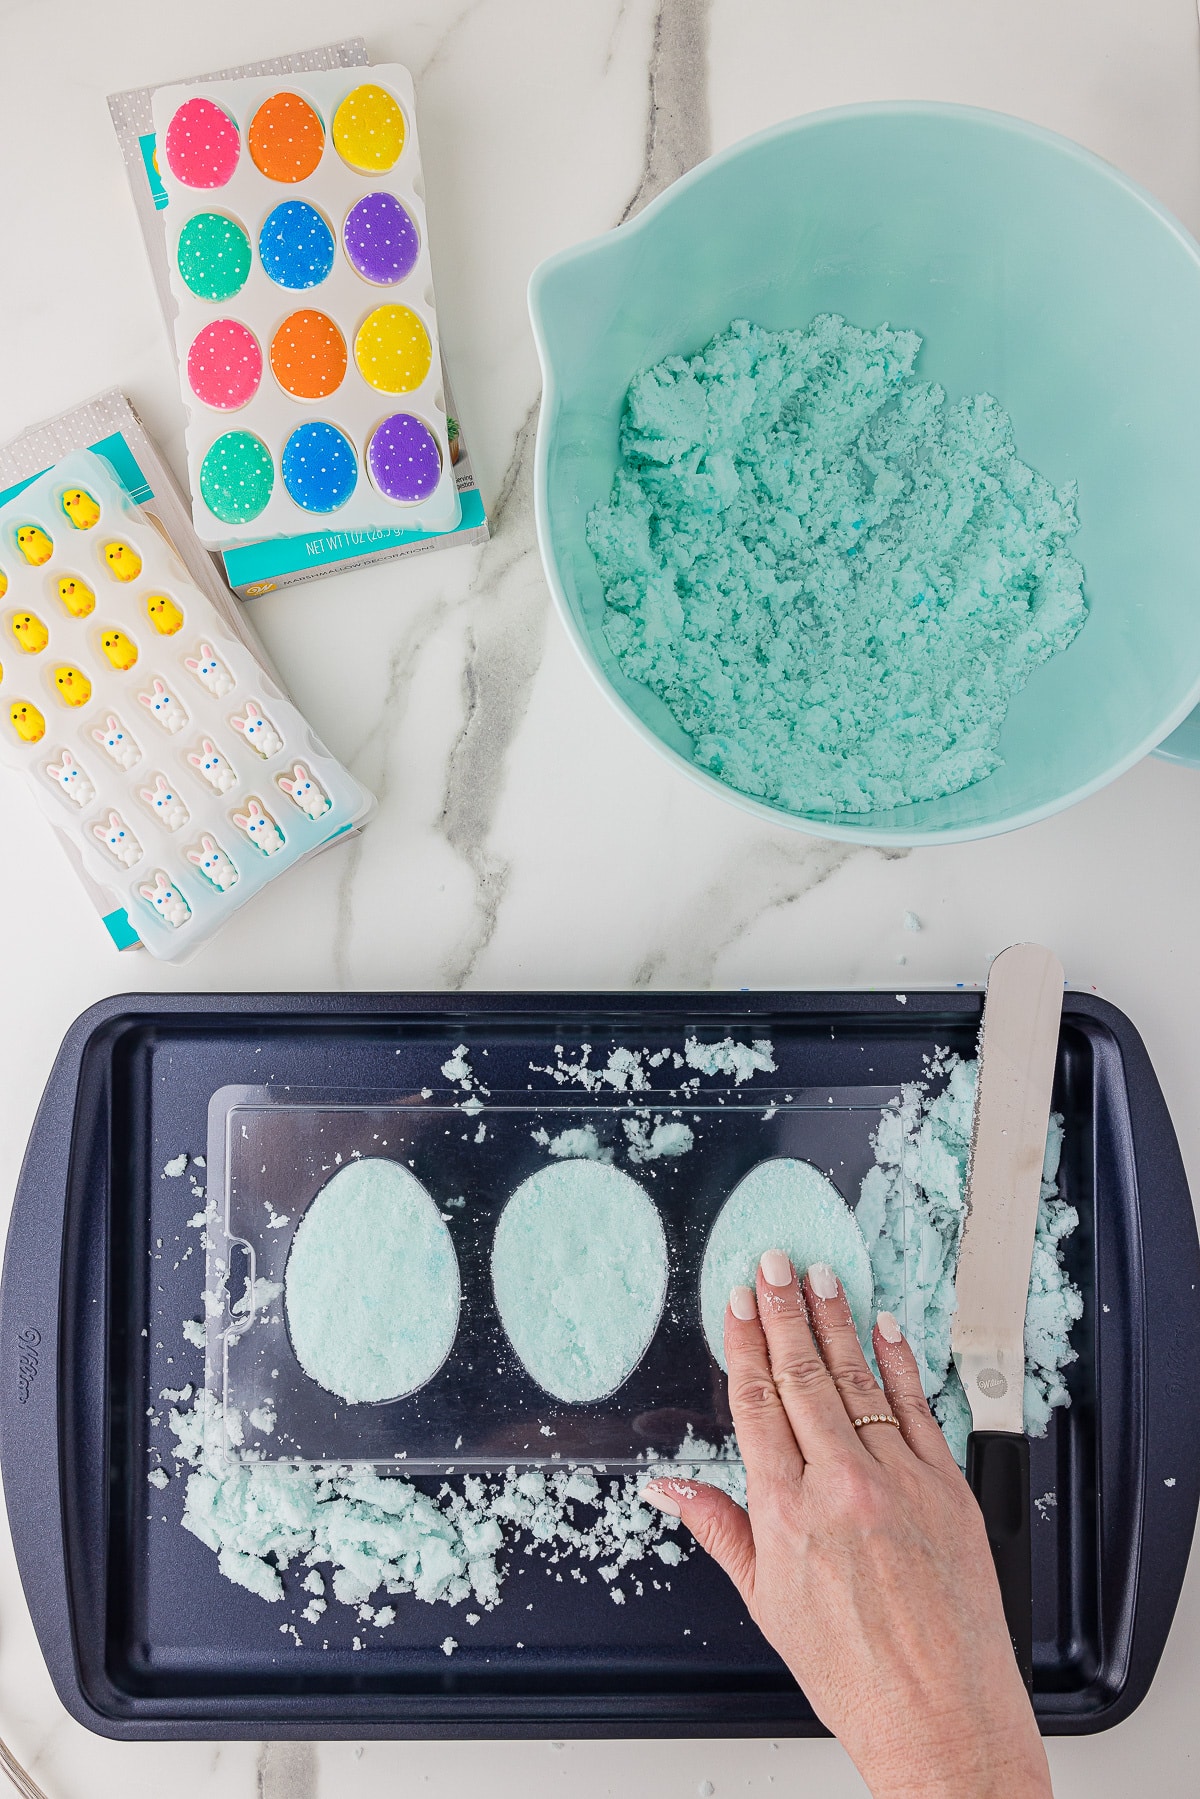 A hand pushing light blue sugar into an Easter Egg mold to make panoramic candy eggs